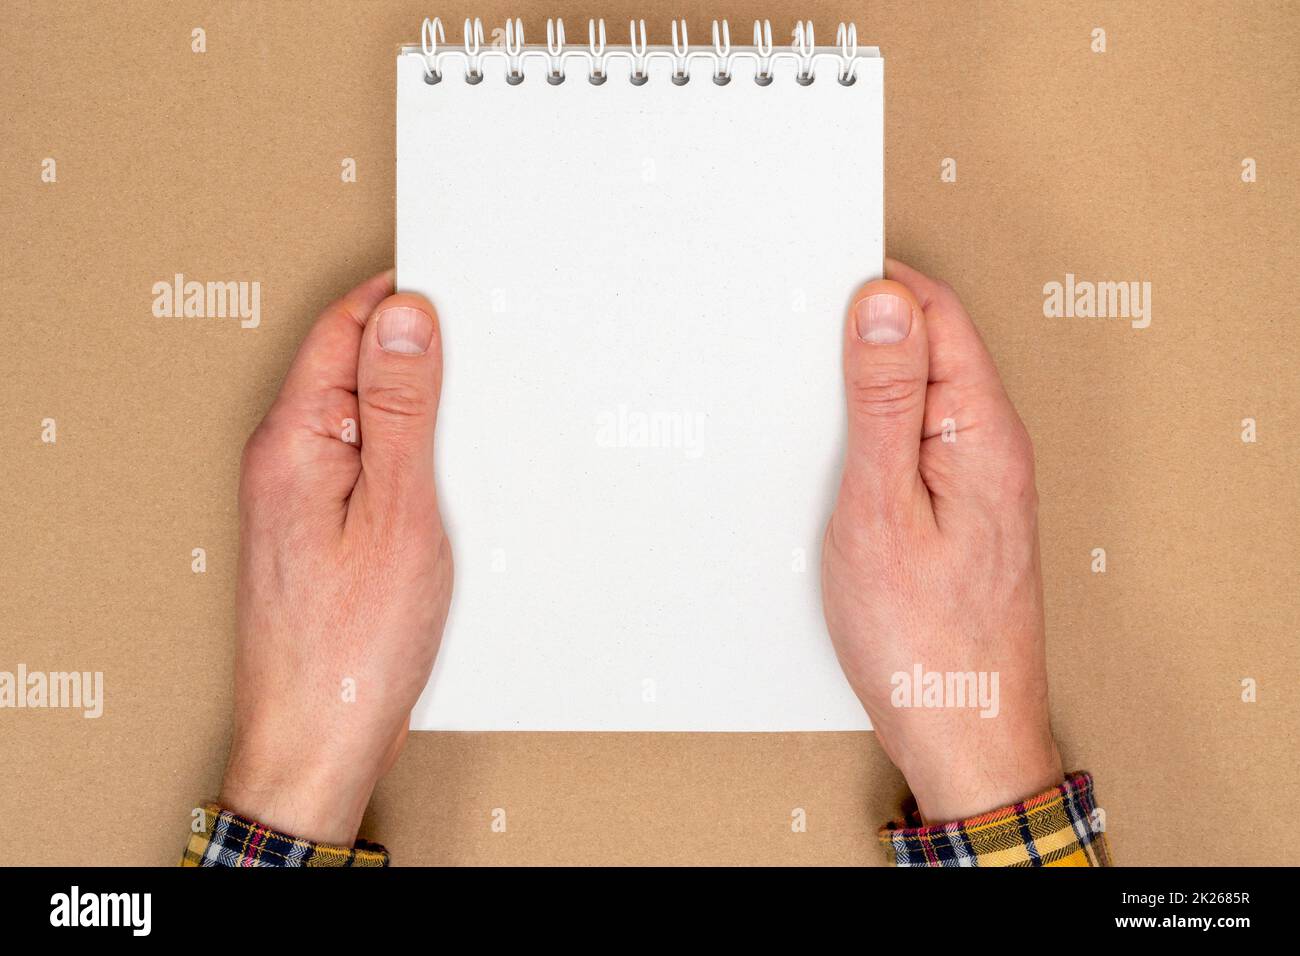 Hands holding a spiral notebook with blank sheets for writings Stock Photo